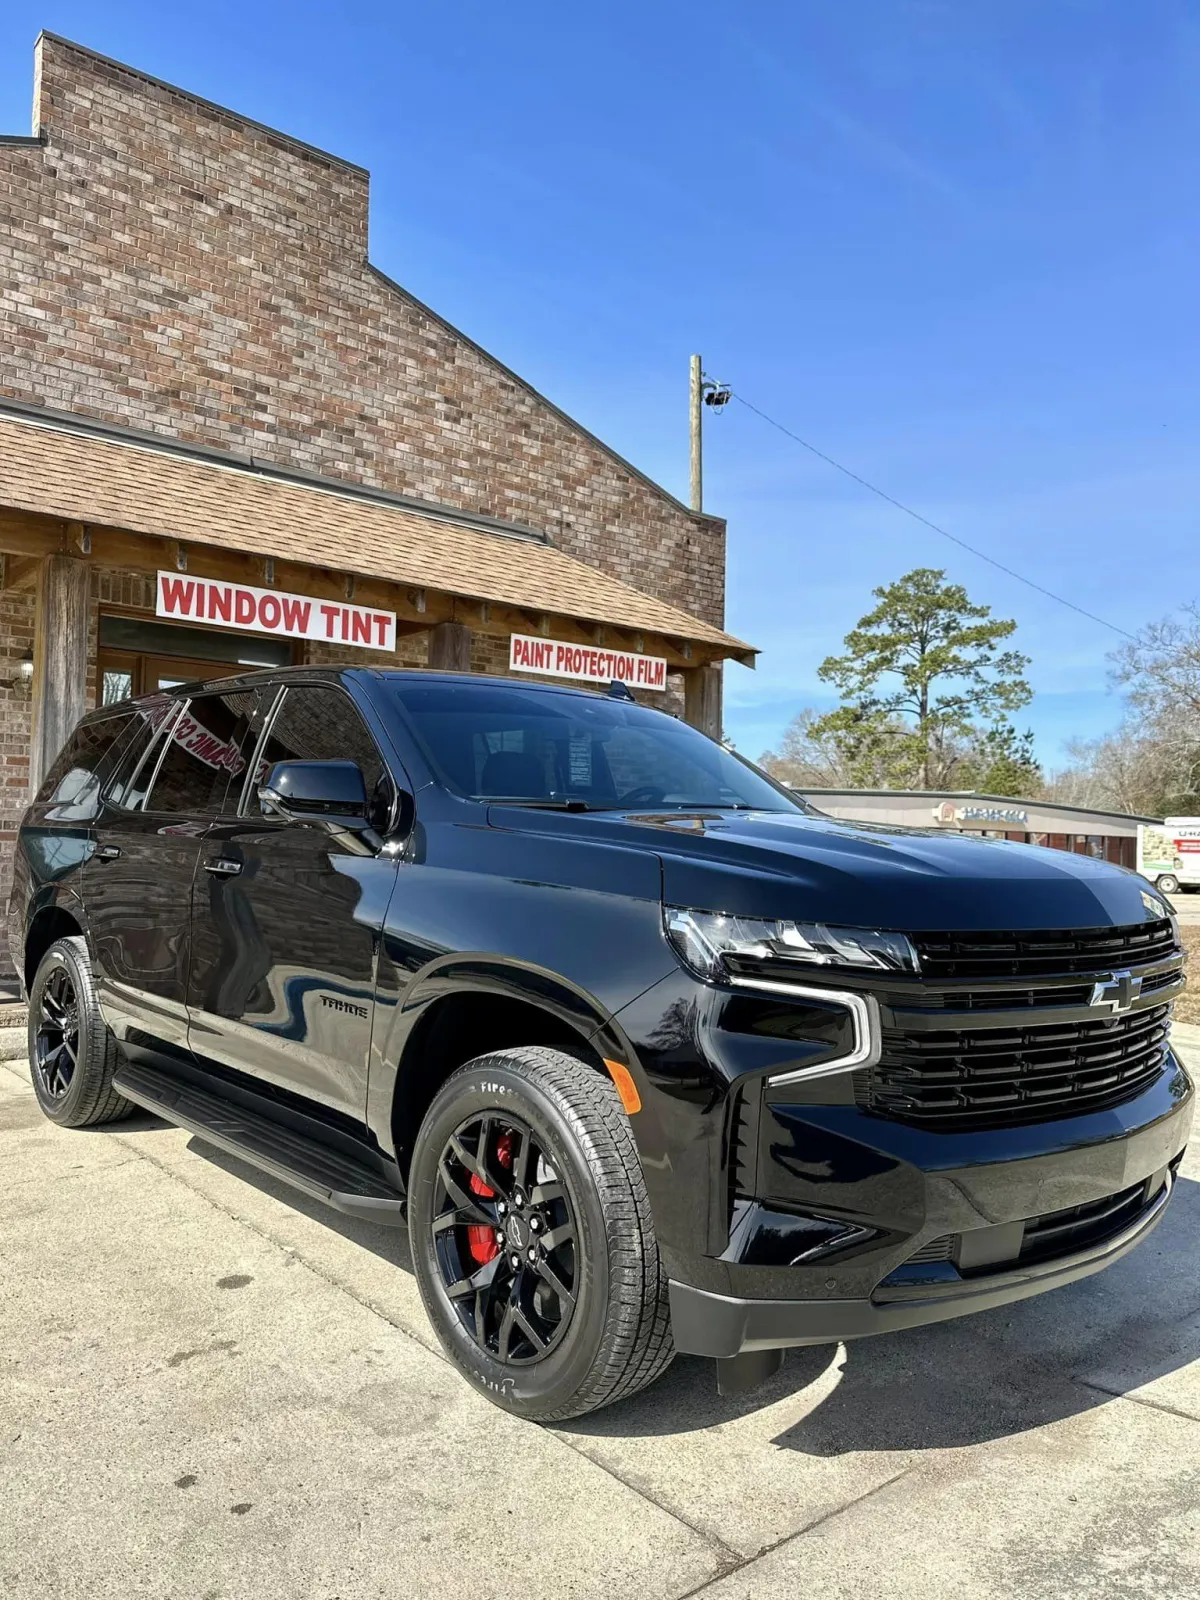 Southern Tint Pros Is Walker's Top Rated Ceramic Coating Specialists